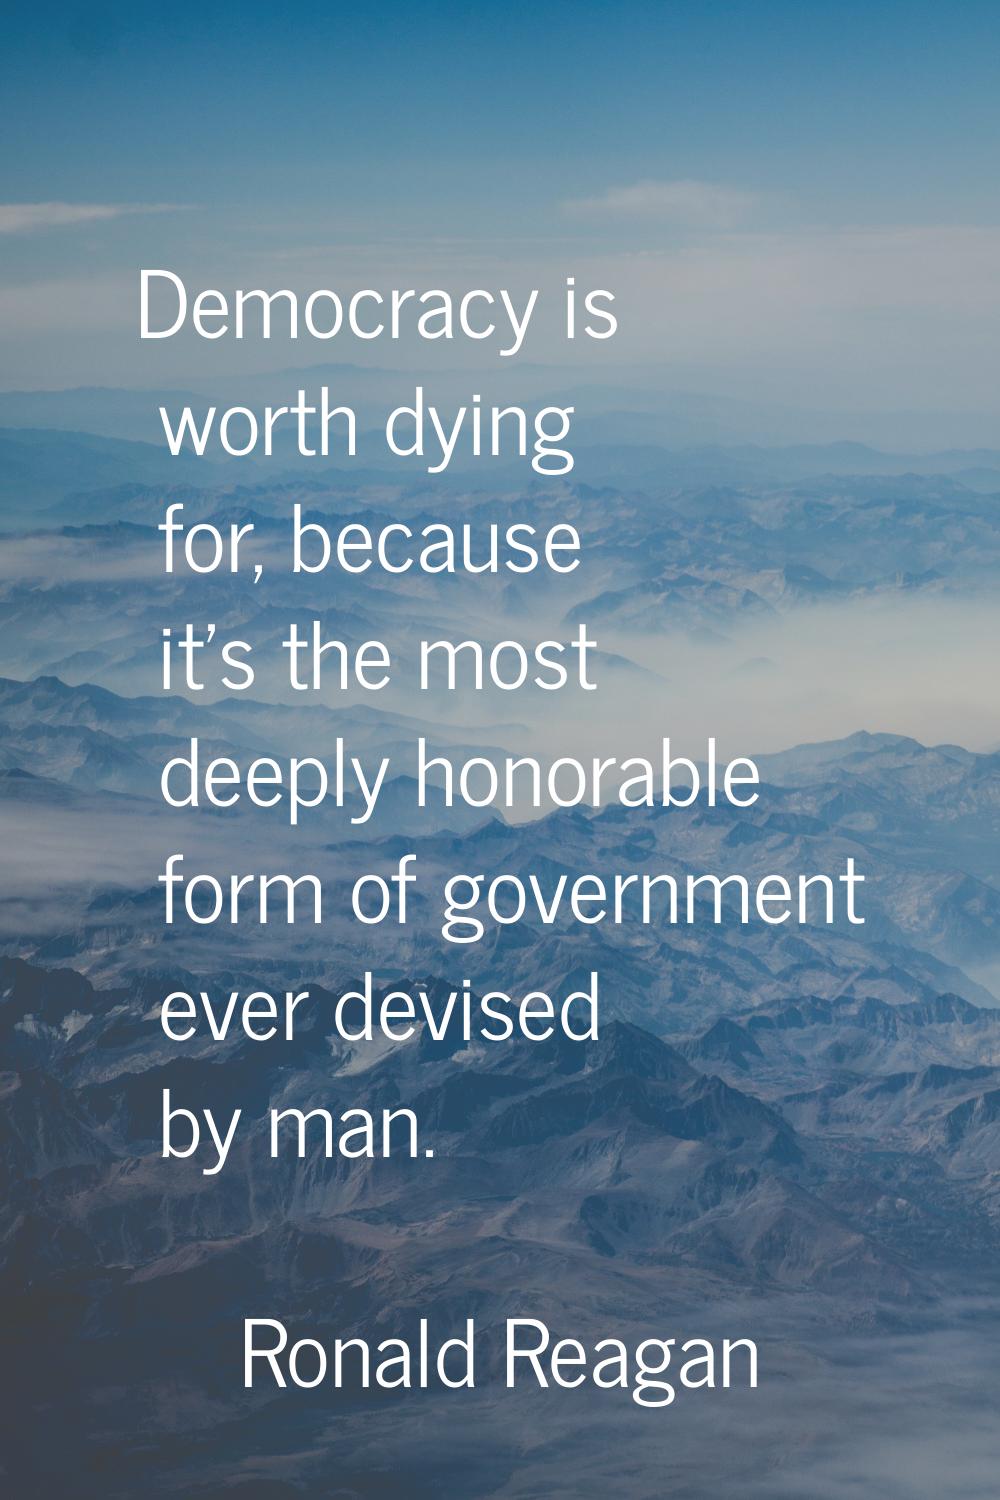 Democracy is worth dying for, because it's the most deeply honorable form of government ever devise